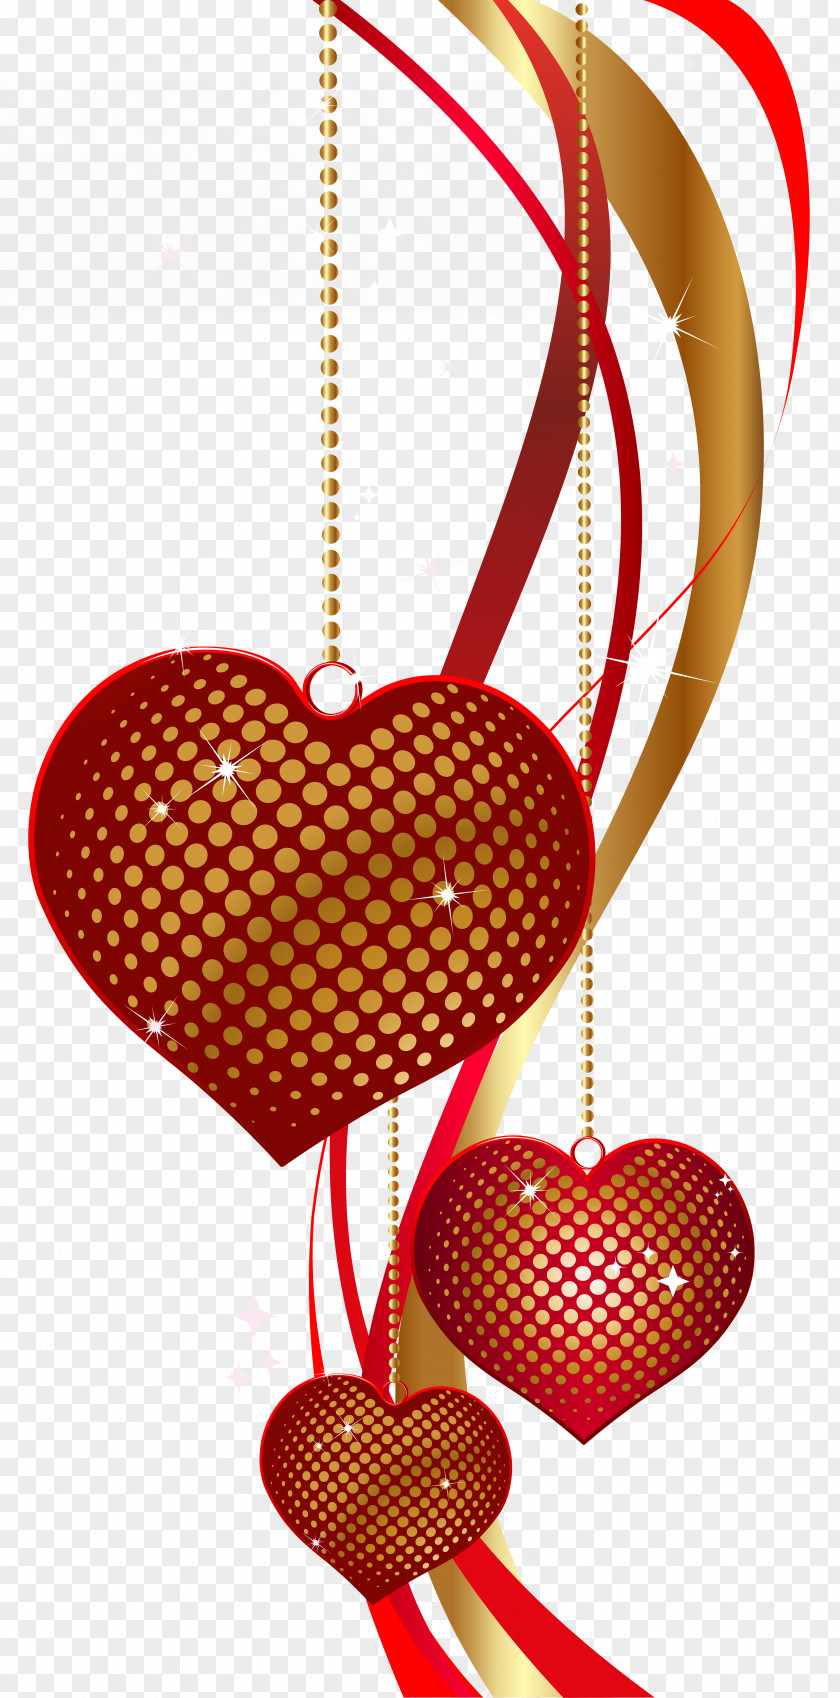 Valentine's Day Decorative Hearts PNG Clip Art Image Heart PNG